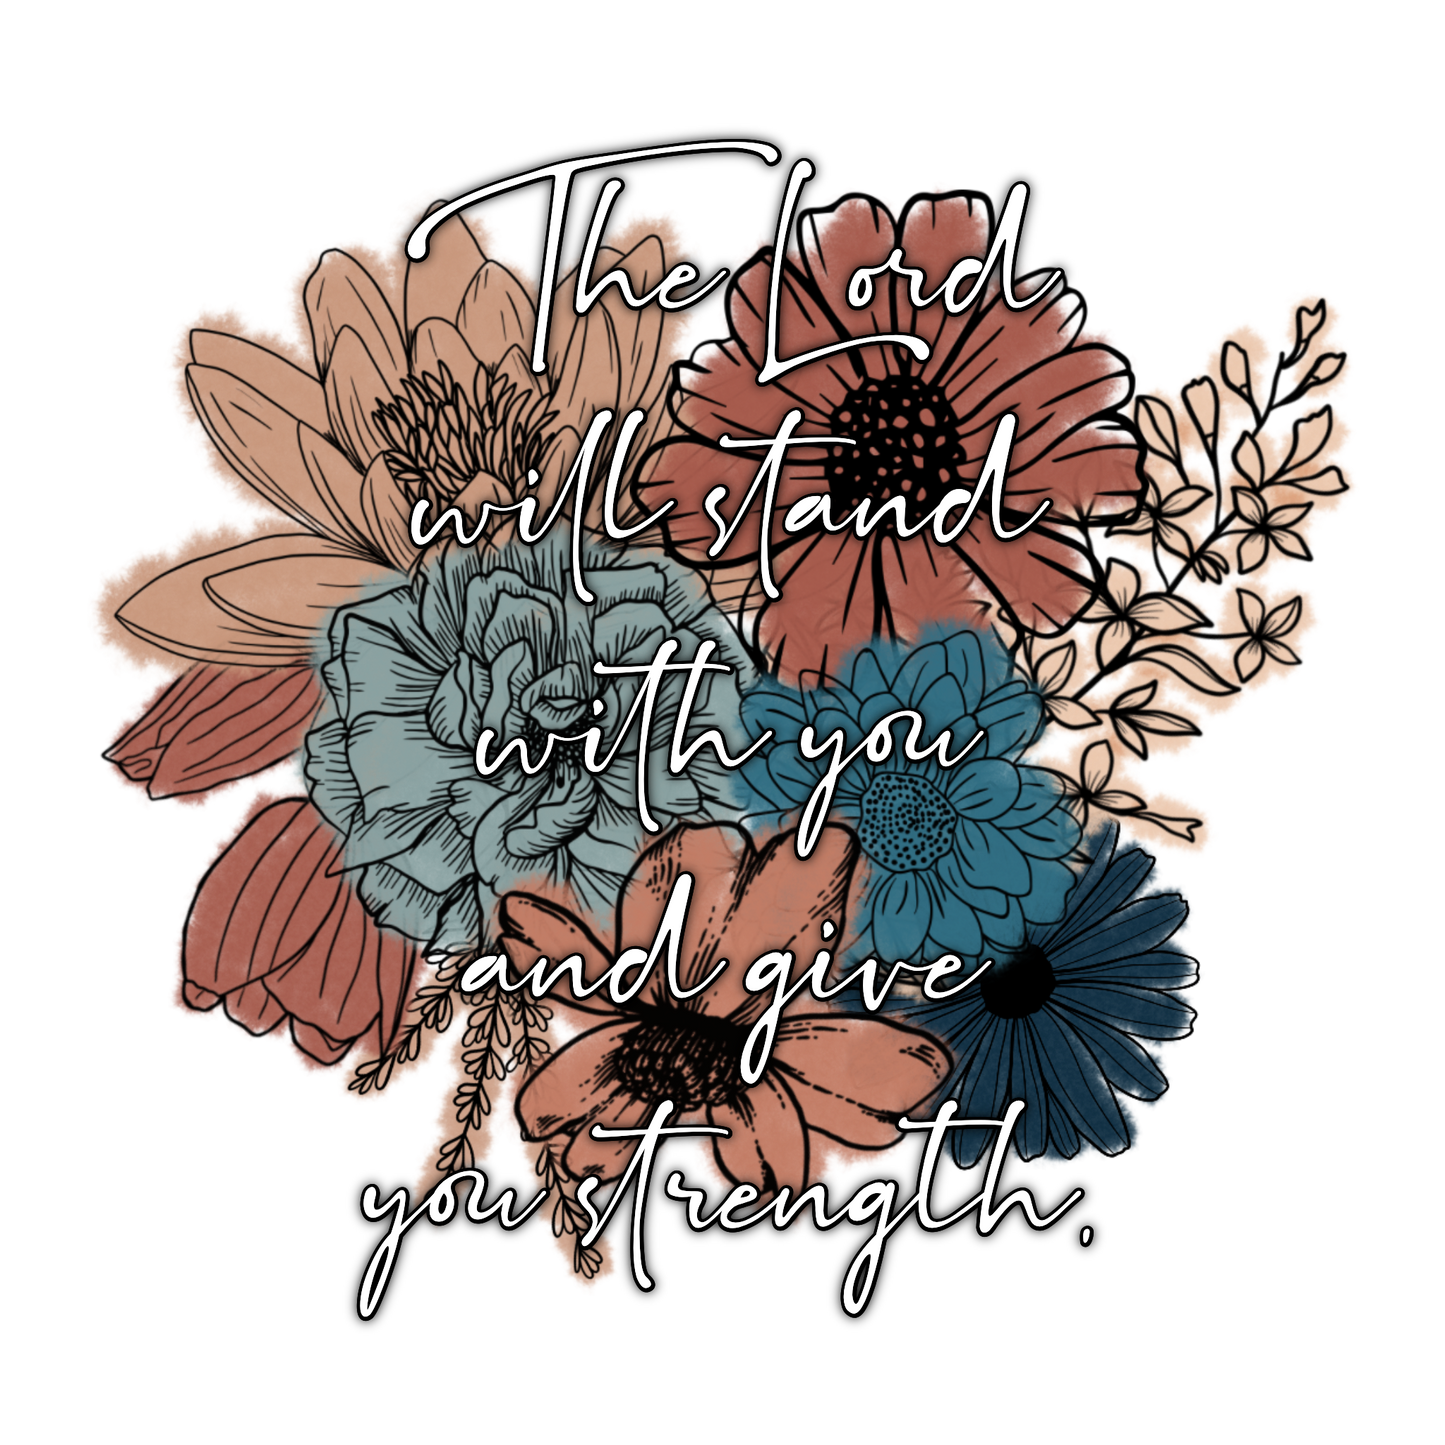 THE Lord will stand with you floral Tumbler